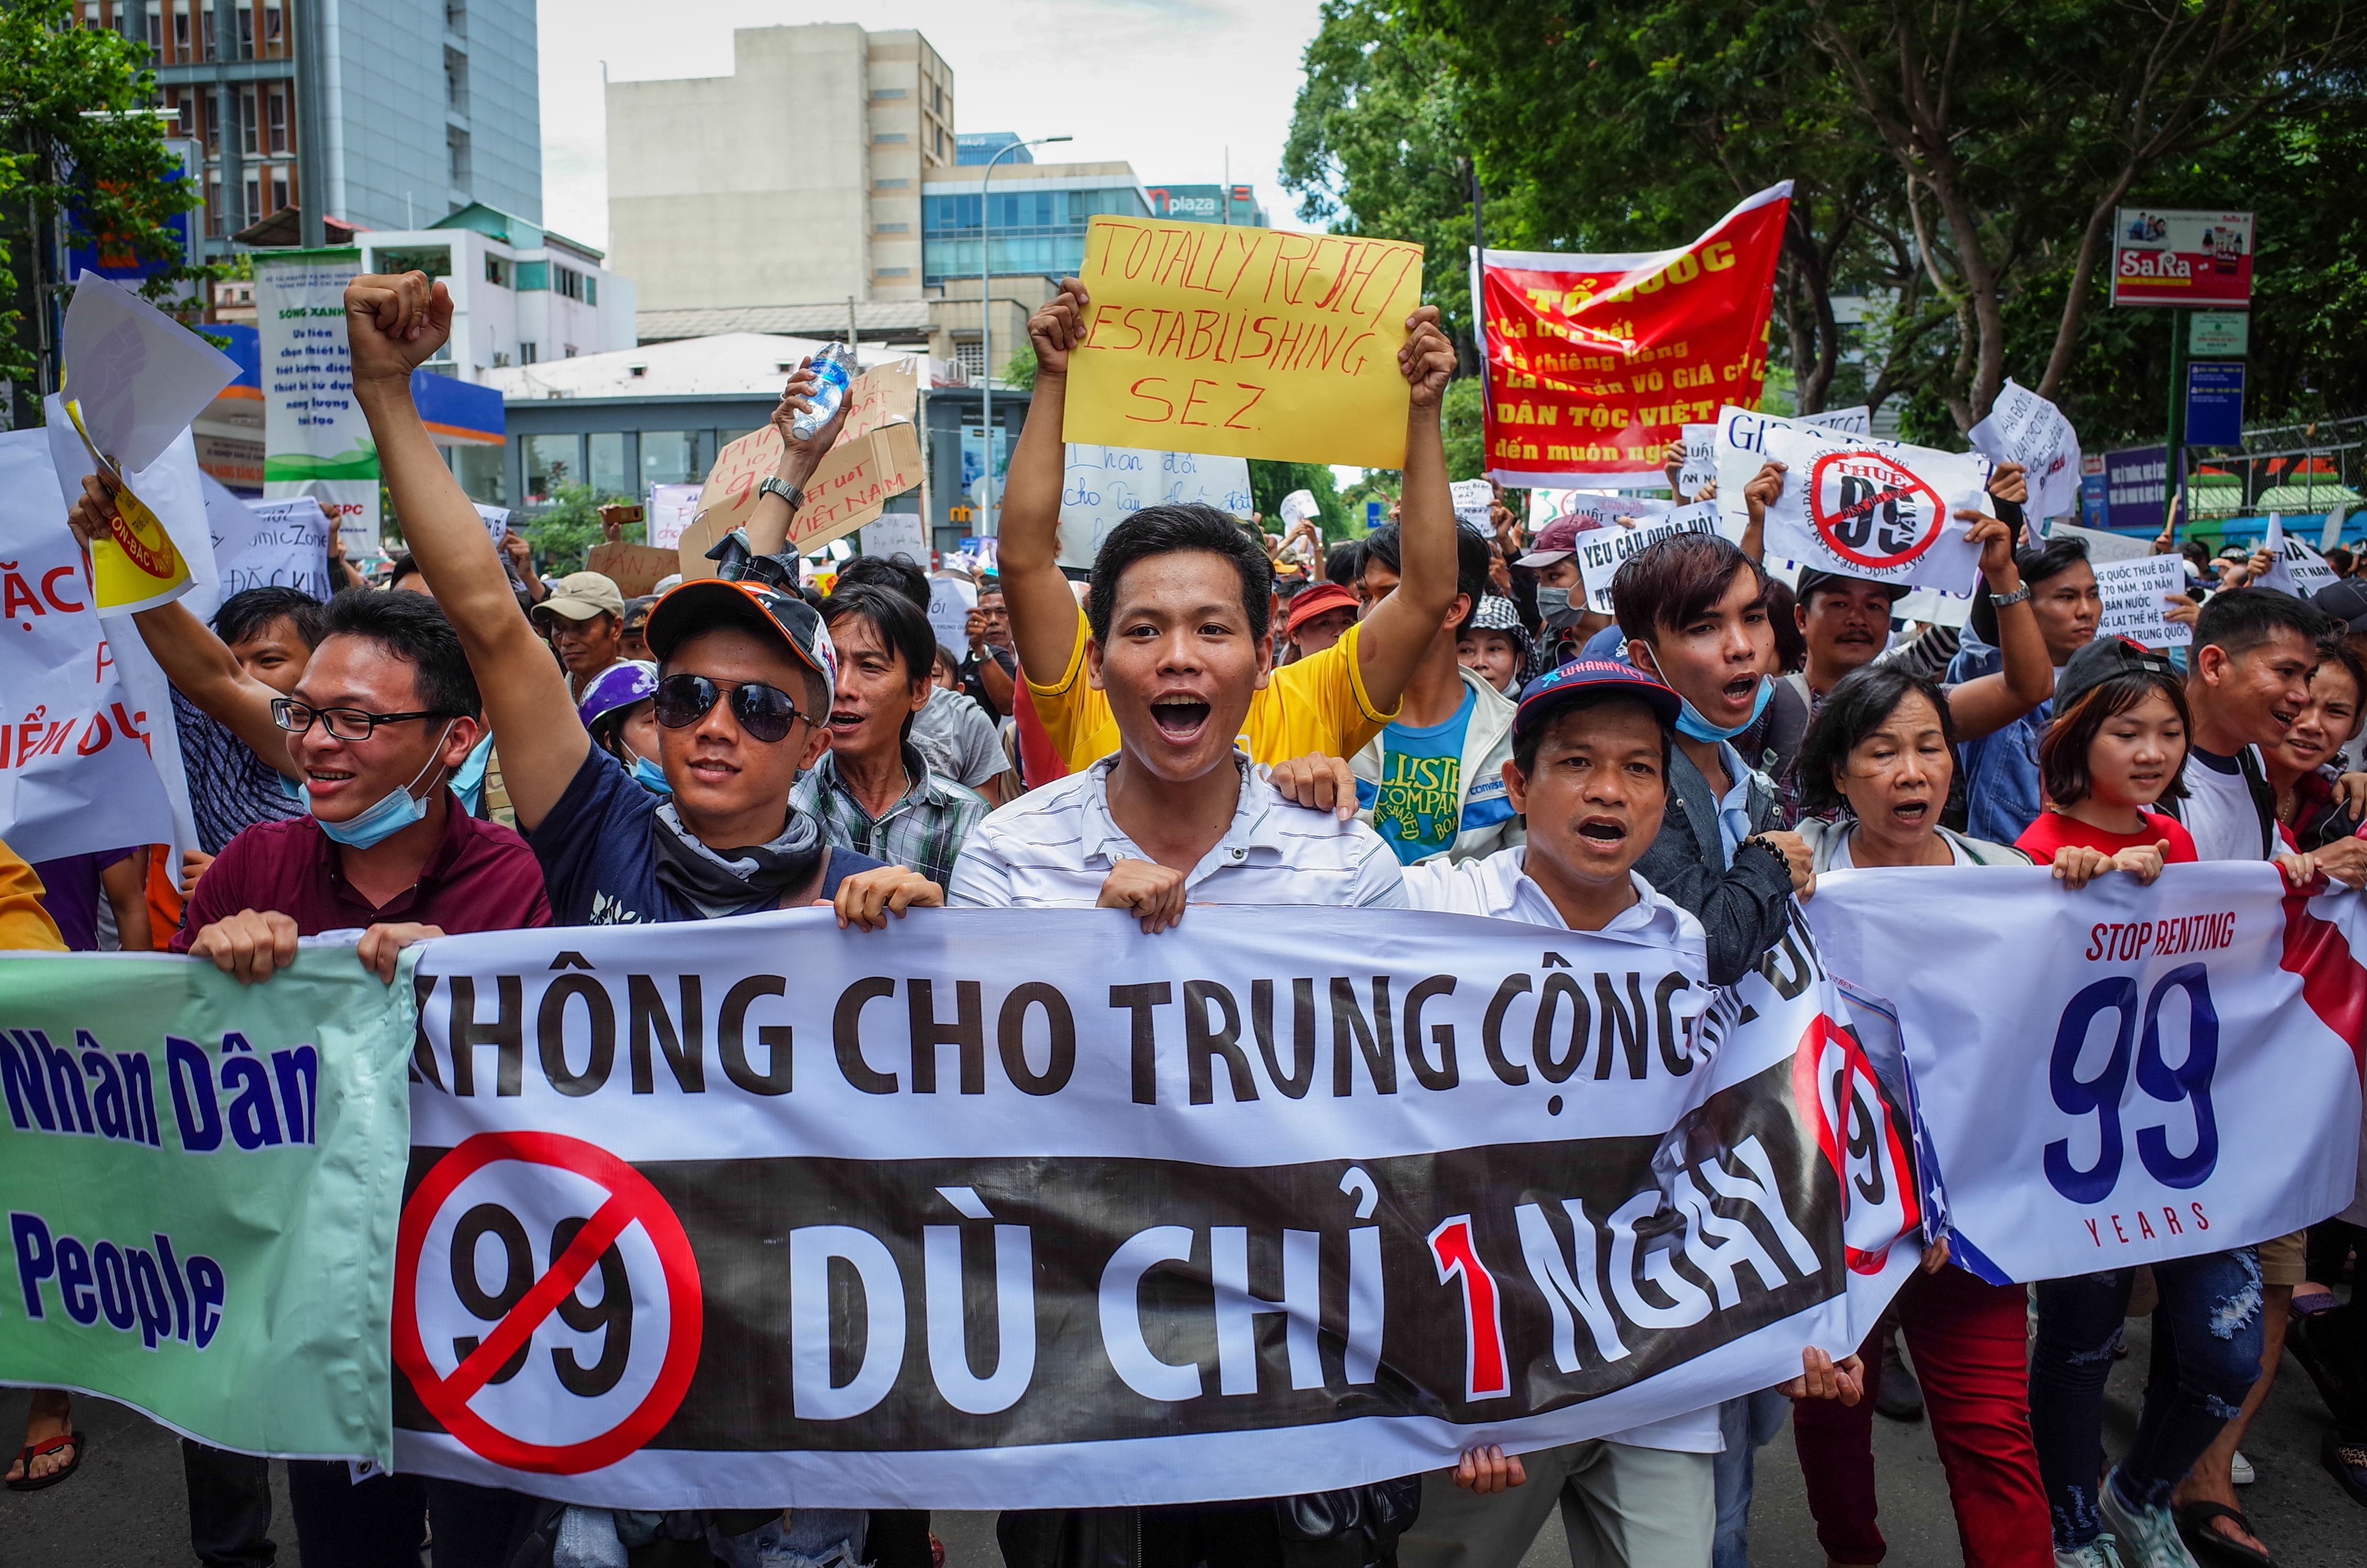 Vietnamese protesters shout slogans against a proposal to grant companies lengthy land leases during a demonstration in Ho Chi Minh City on June 10, 2018. (Kao Nguyen&mdash;AFP/Getty Images)